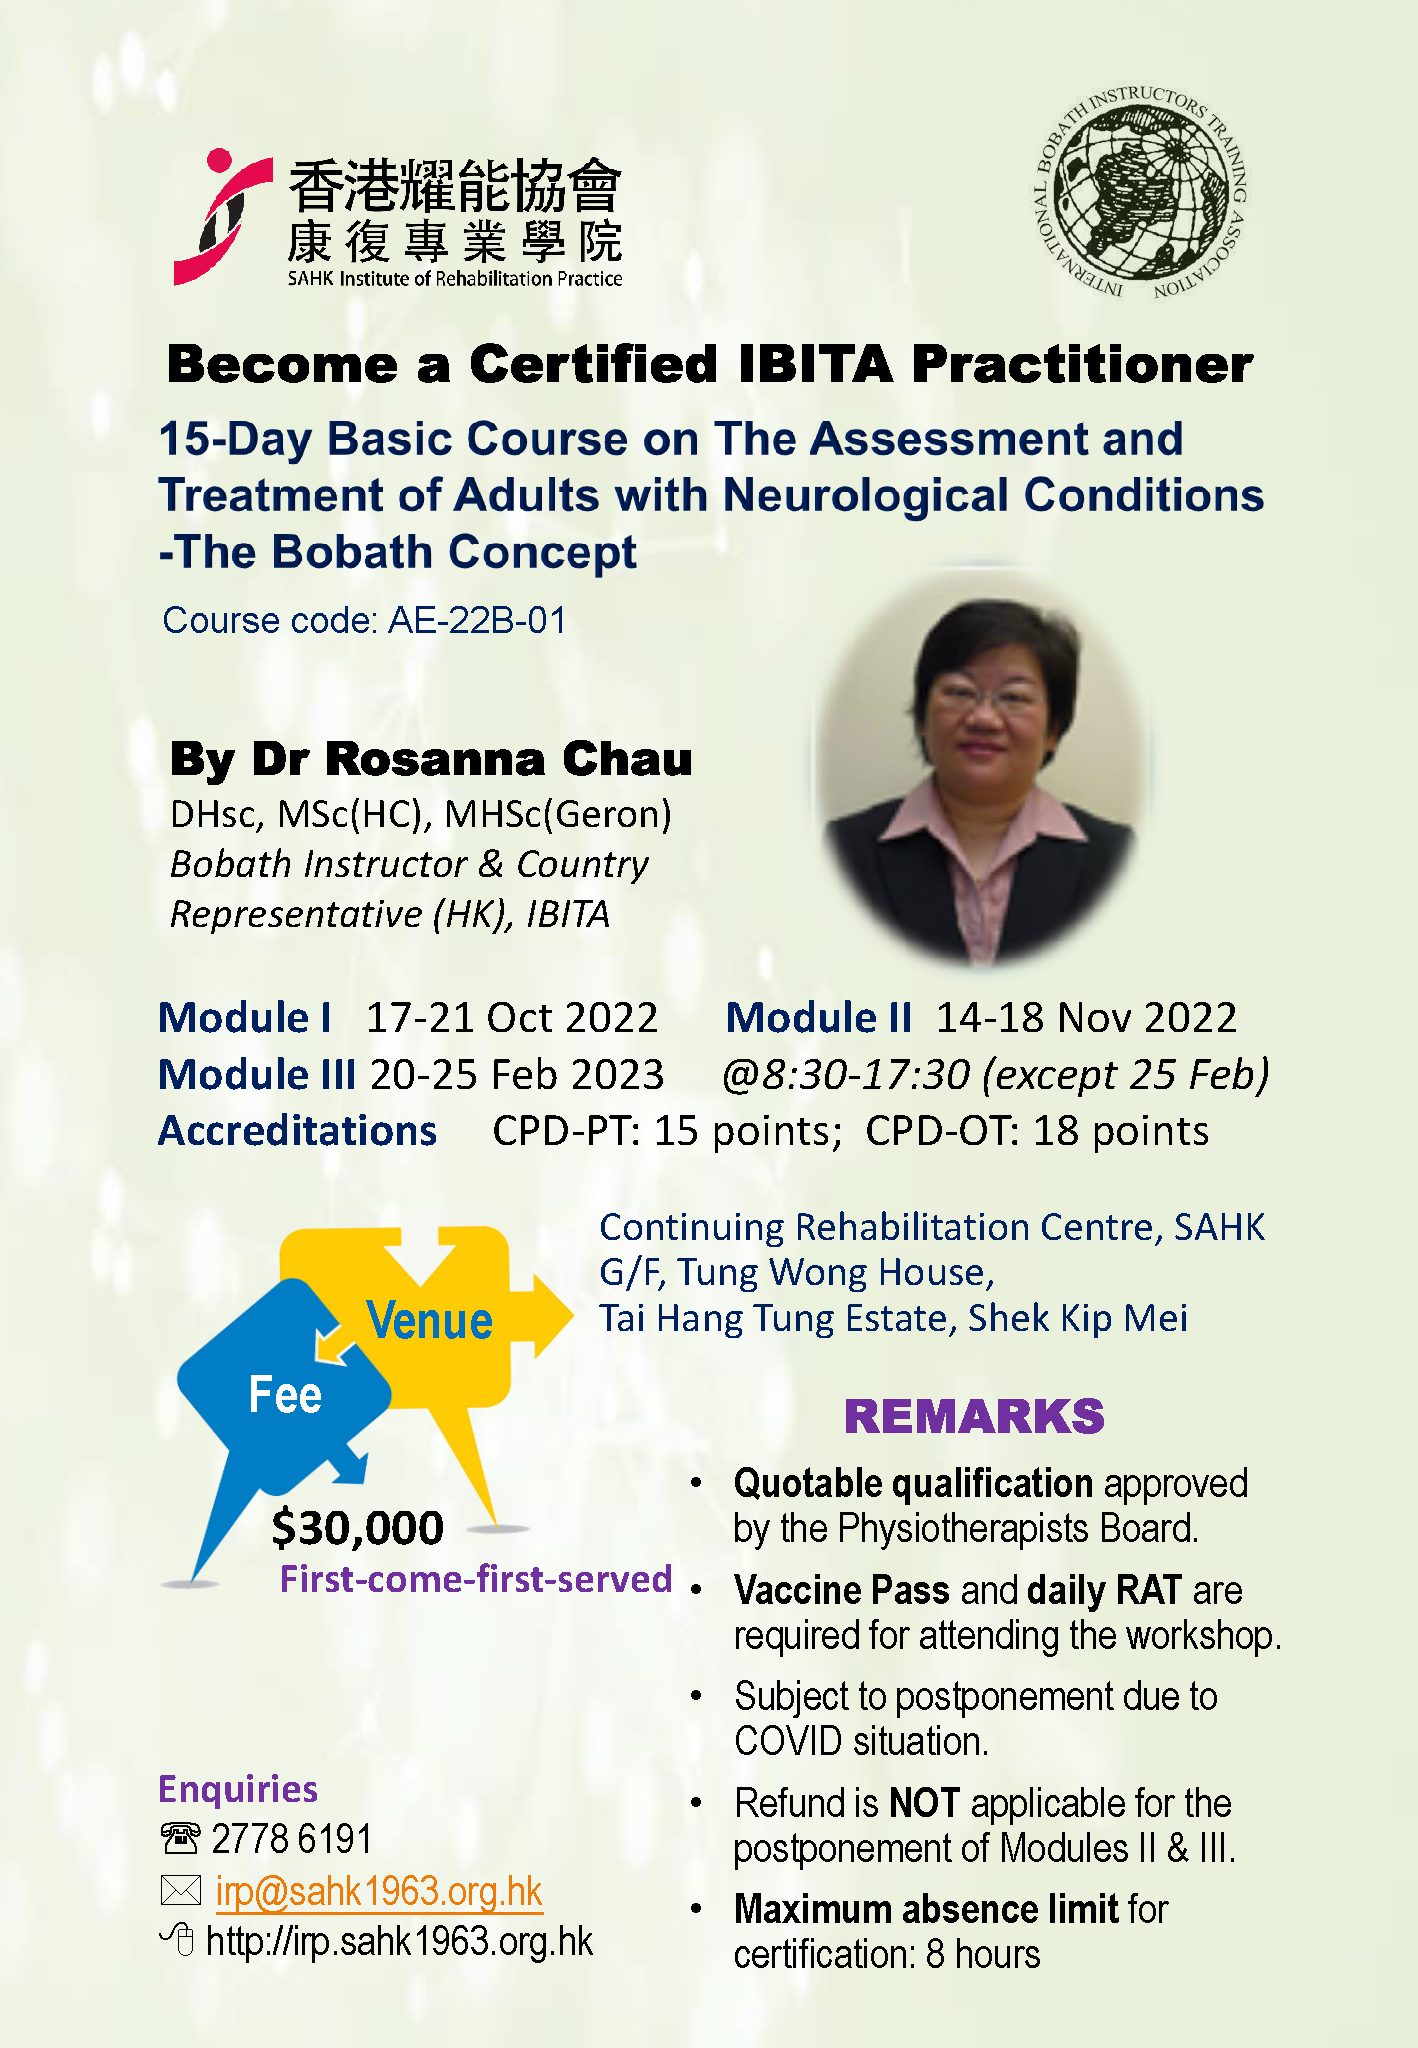 15
Day Basic Course on The Assessment and Treatment of
Adults with Neurological Conditions The Bobath Concept'